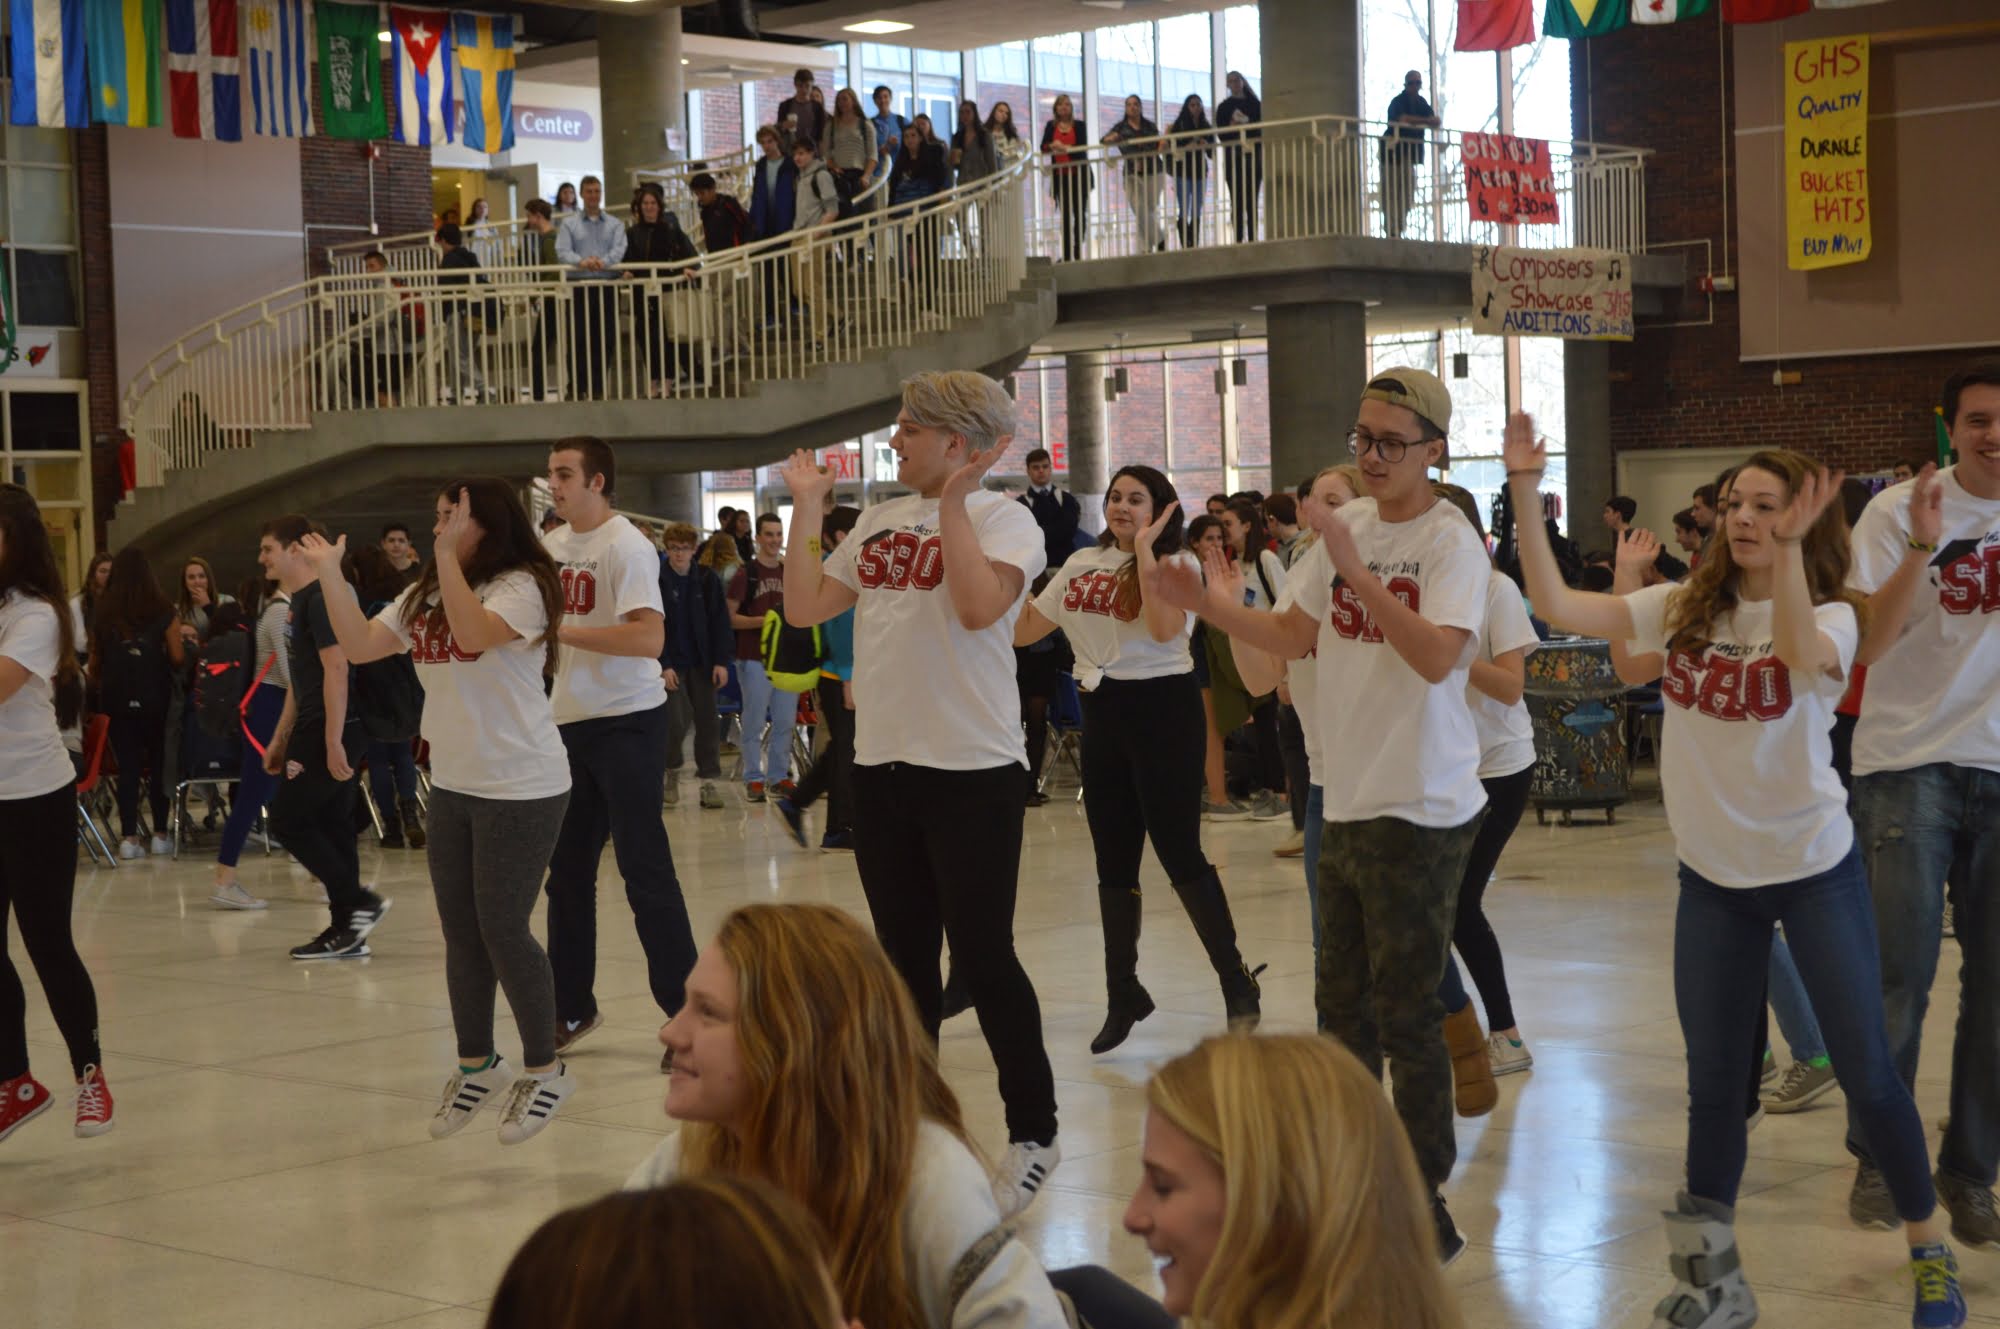 Seniors enjoy themselves during a flash mob in the student center to promote the show.